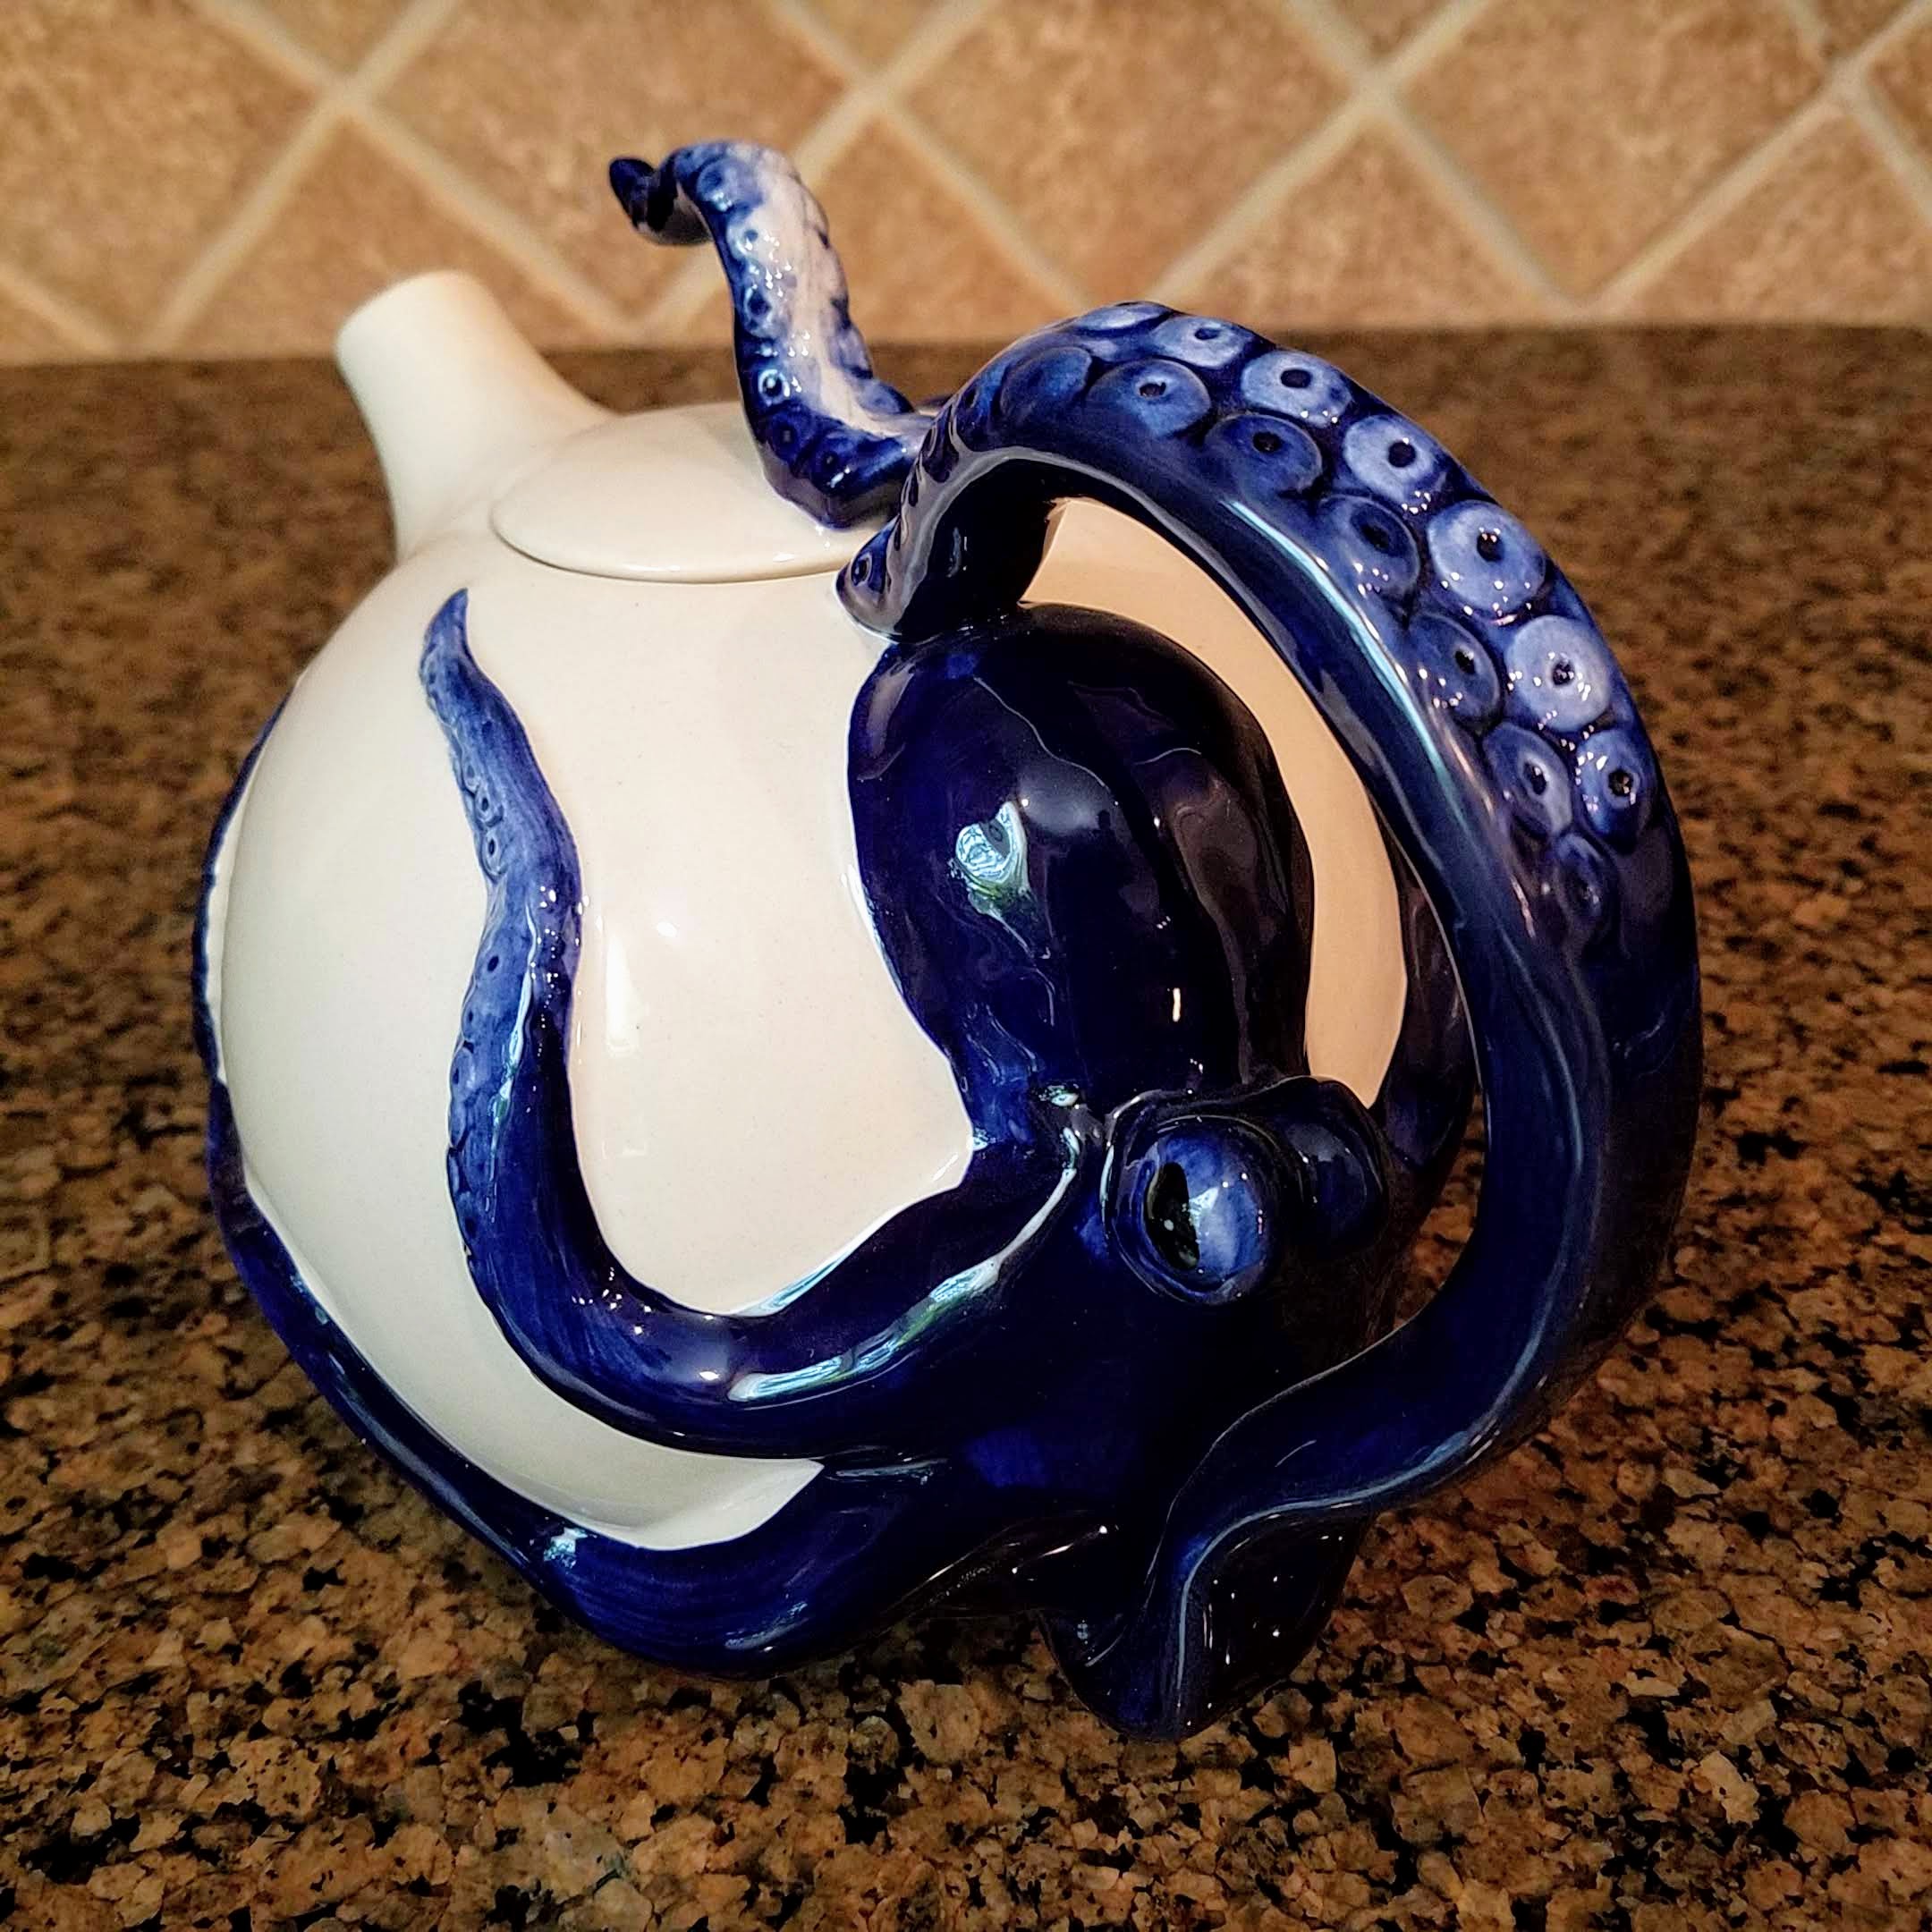 This Blue Octopus Ceramic Teapot Decorative Collectable Kitchen Décor Goldmic New is made with love by Premier Homegoods! Shop more unique gift ideas today with Spots Initiatives, the best way to support creators.